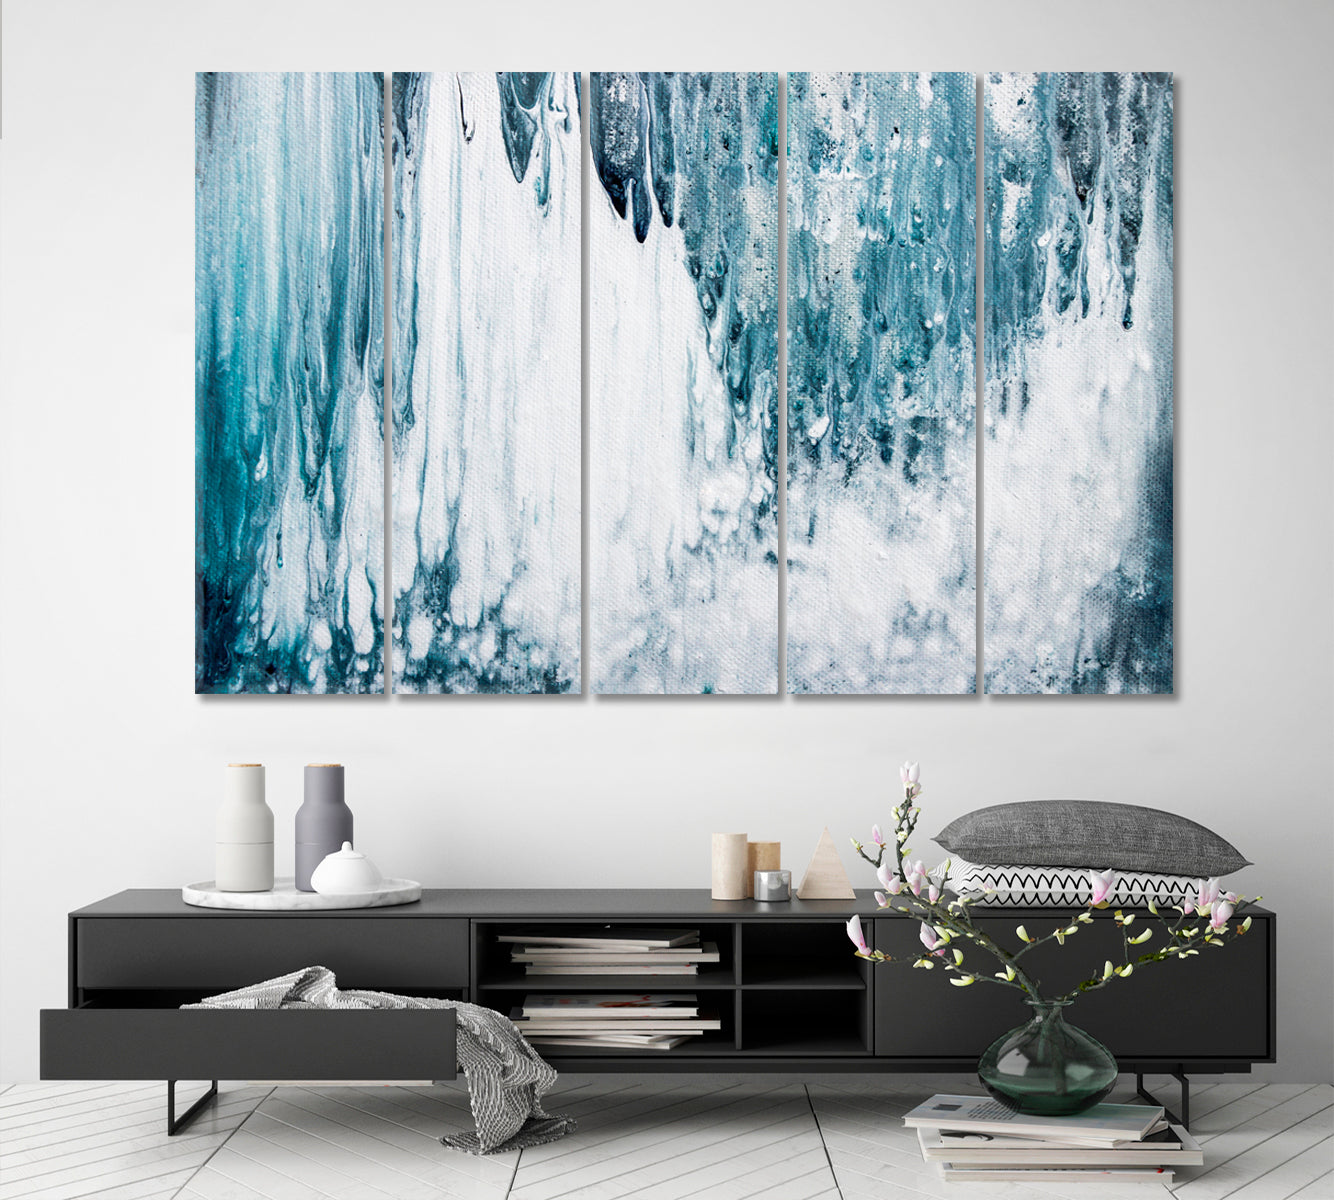 Rainy Paint Blue And White Abstraction Fluid Art, Oriental Marbling Canvas Print Artesty 5 panels 36" x 24" 